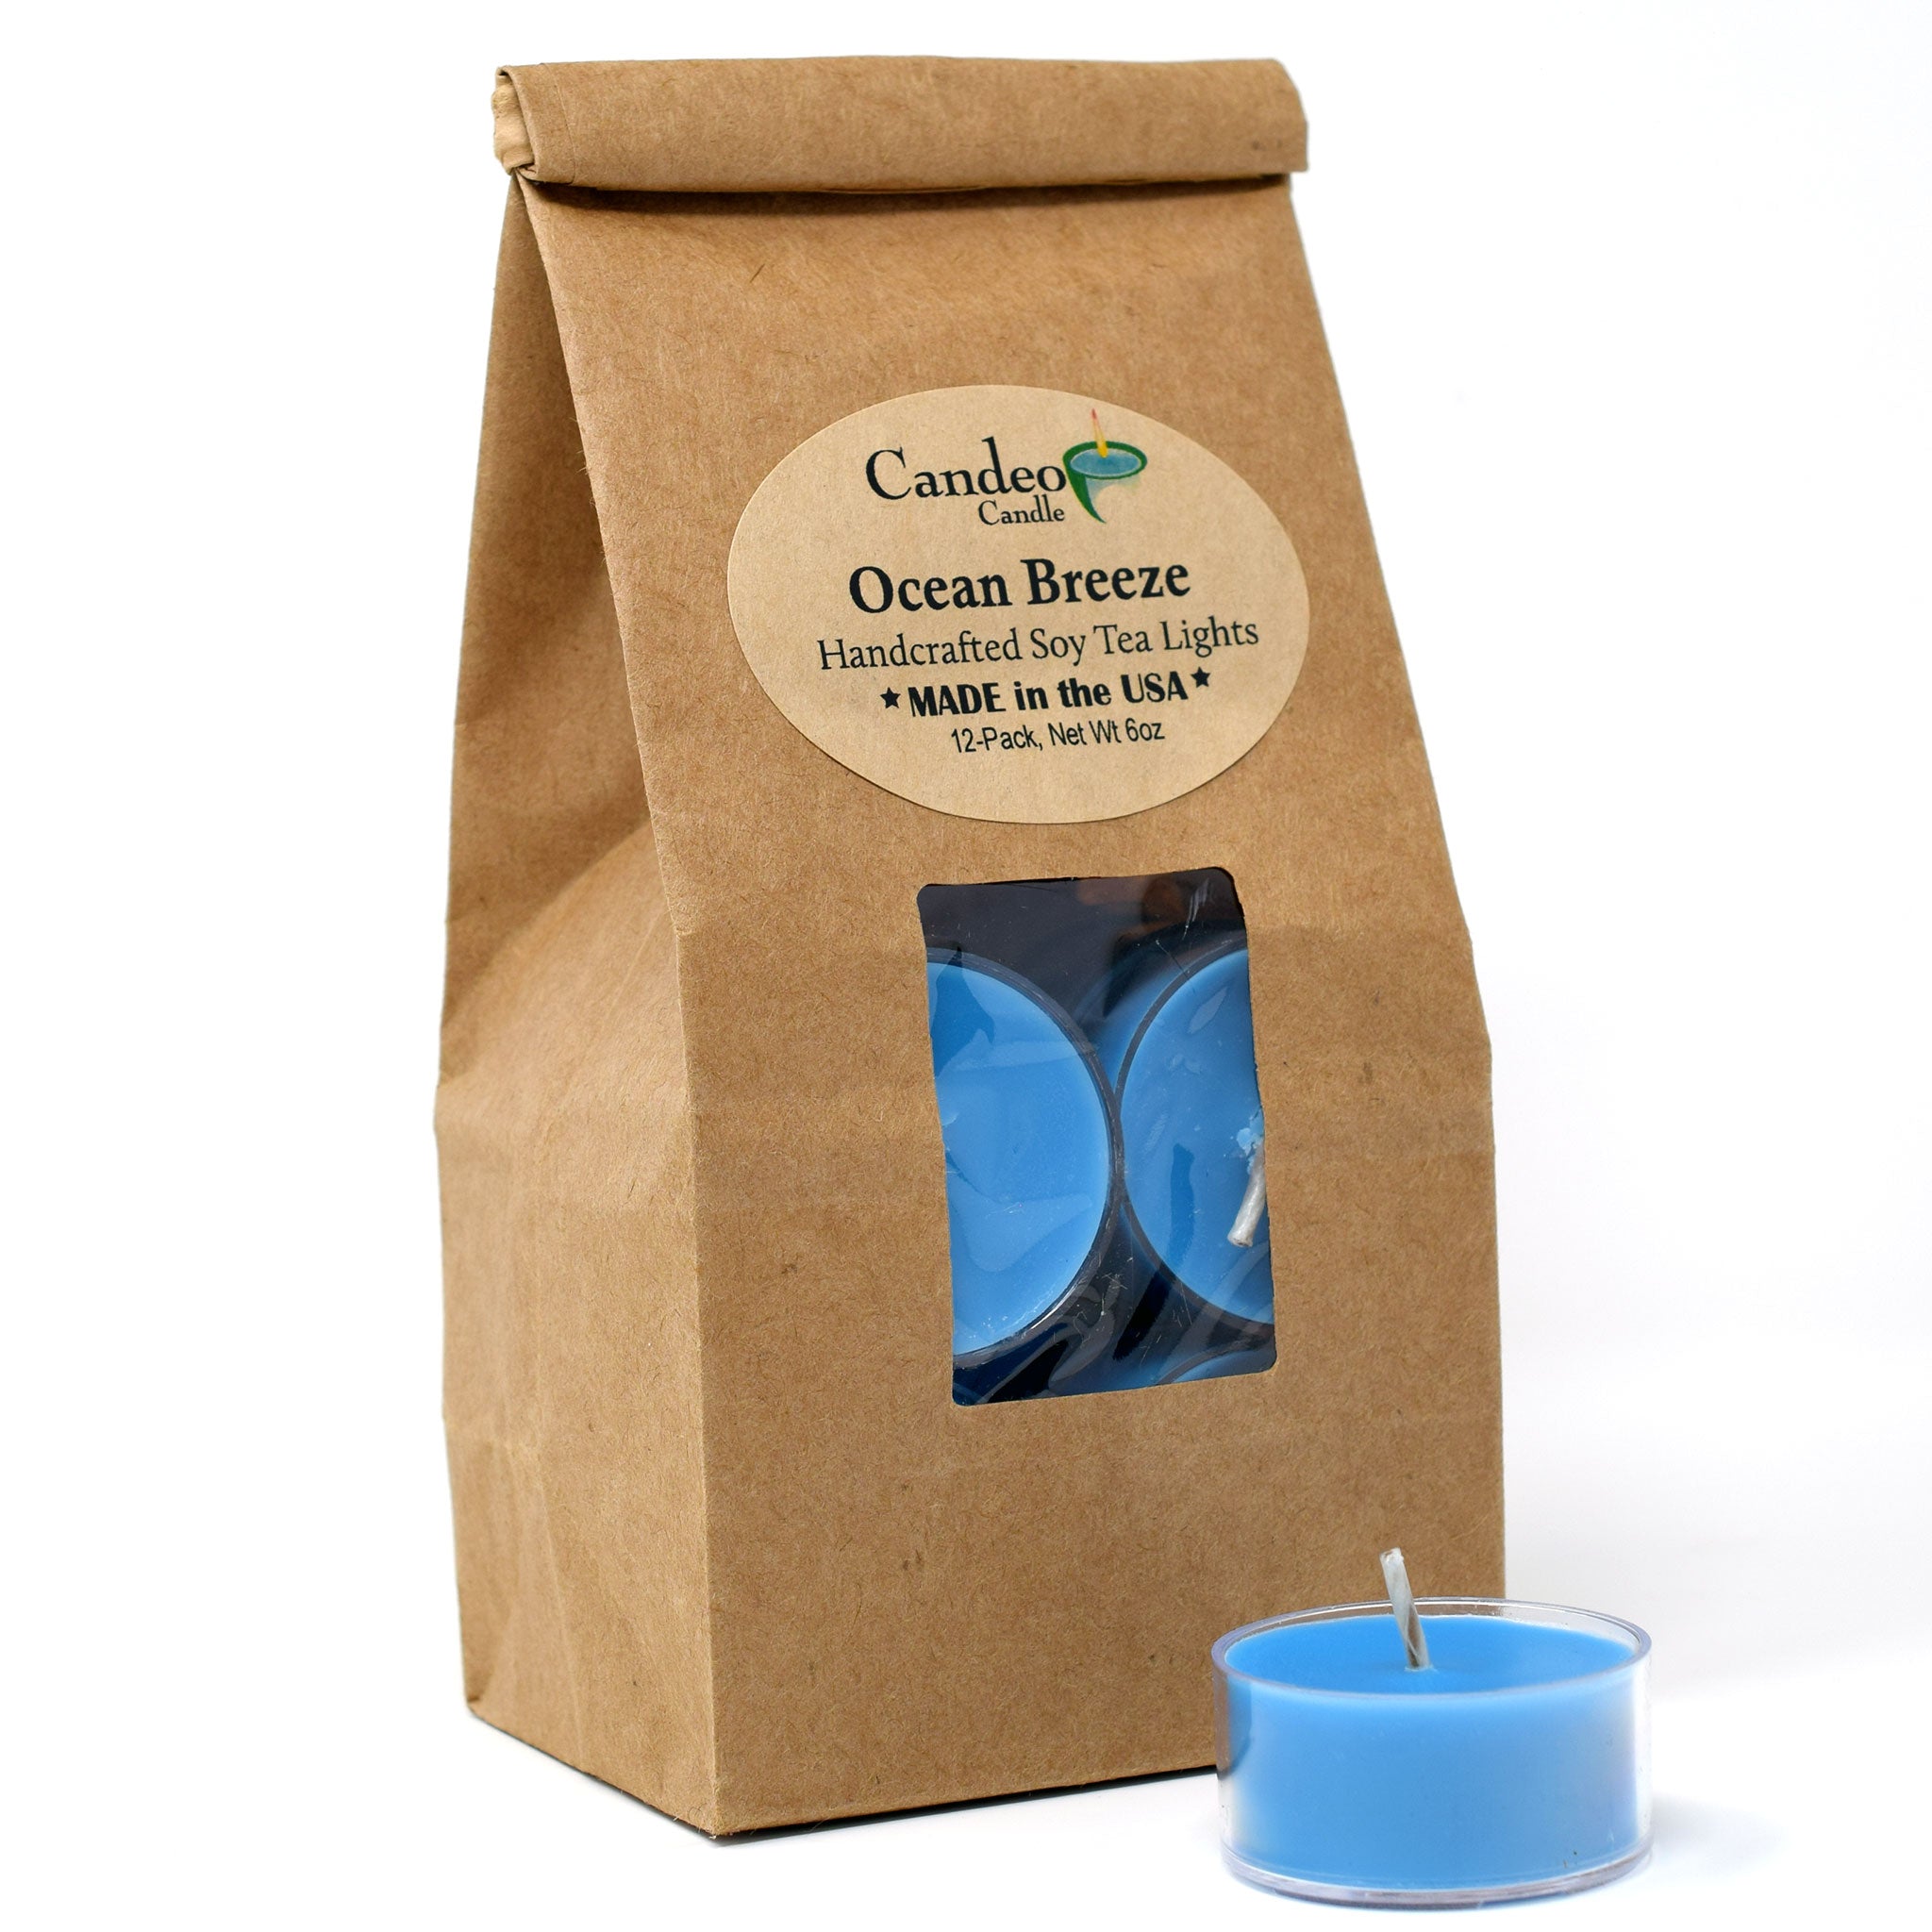 Ocean Breeze, Soy Tea Light 12-Pack - Candeo Candle